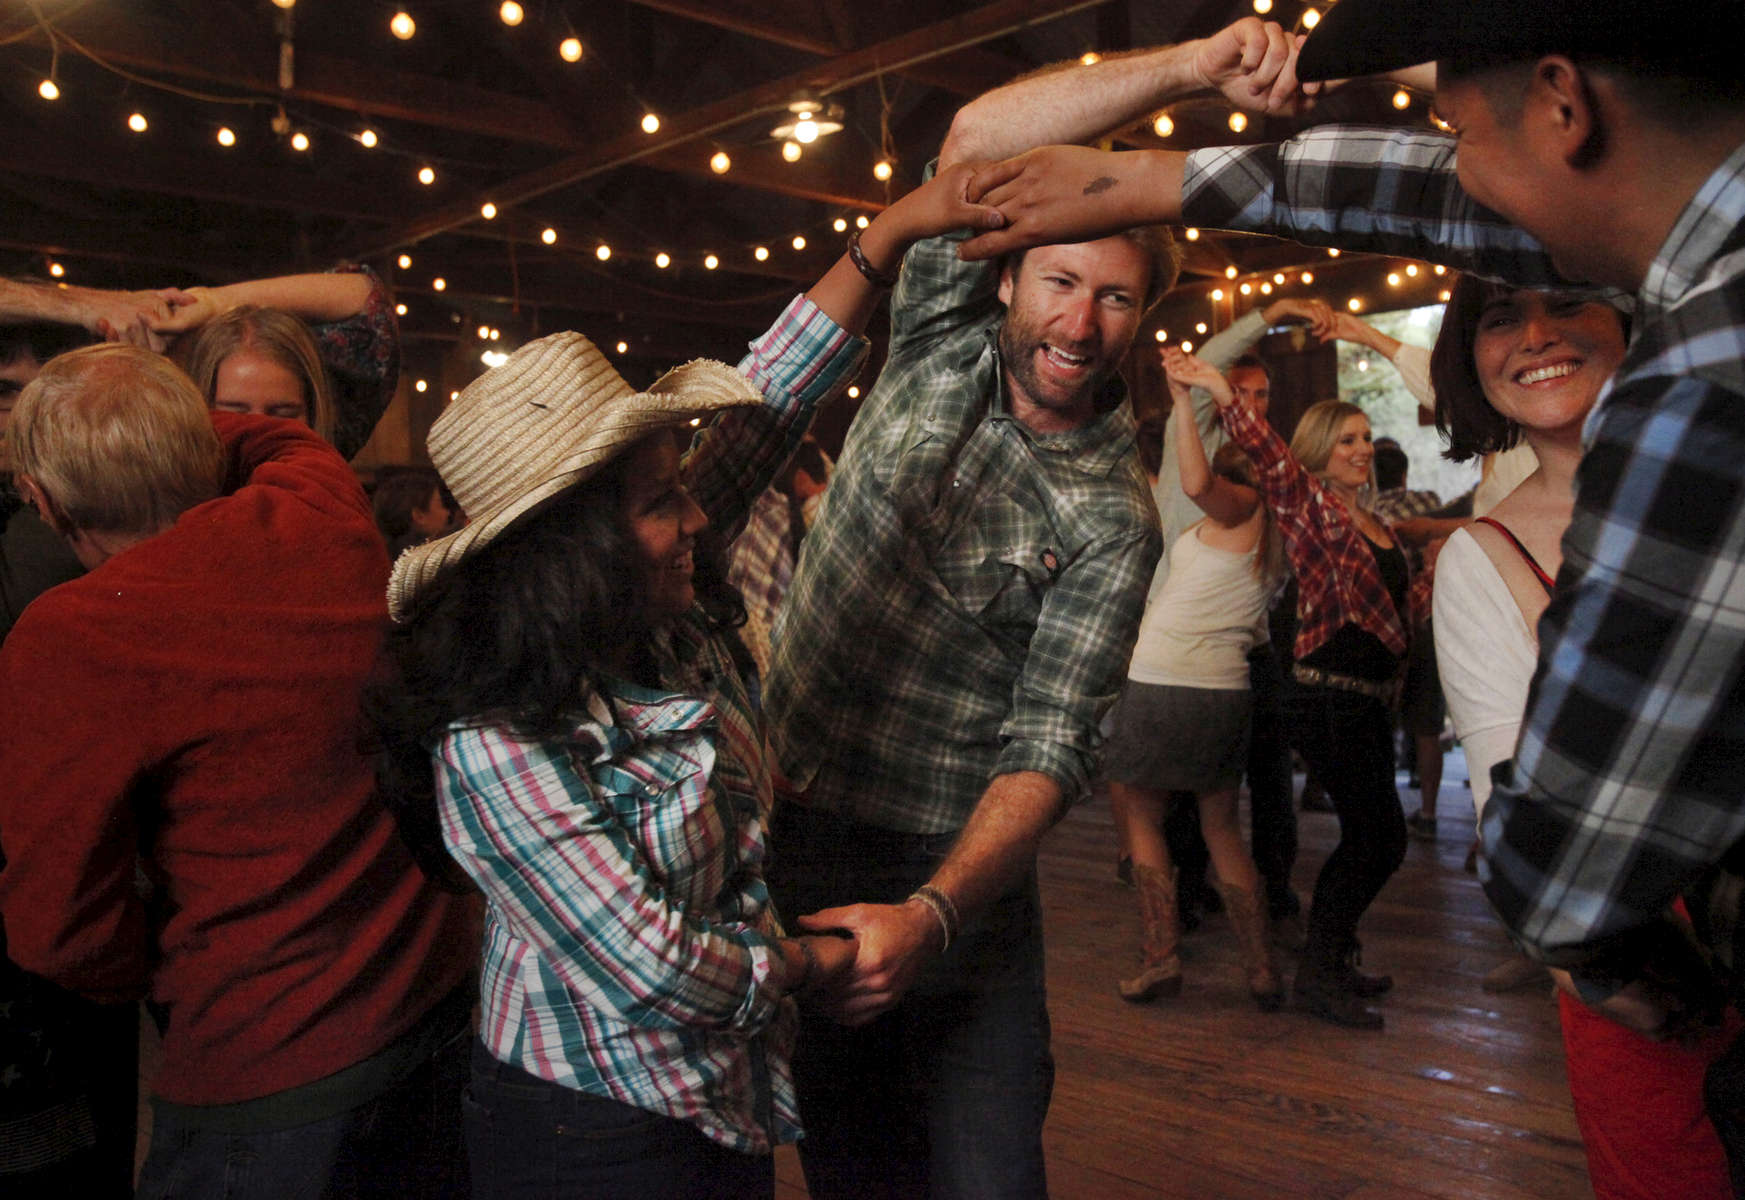 From left, Birza Santiago, 26, Brian Boyce, 30, Stacey Garcia, 31, and Jesus Jocobo, 37, laugh as they do a group dance move together during the monthly barn dance May 17, 2014 at Pie Ranch in Pescadero, Calif. Every month, the educational farm holds a work day and welcomes people to volunteer at the farm. Afterwards, people gather for a potluck and then an evening of traditional barn dancing with a caller and a live band. Margaret More has been attending the dance for eight years, she says she enjoys the intergenerational aspect and added, {quote}it feels like [we've] stepped back 150 years in civilization.{quote} 